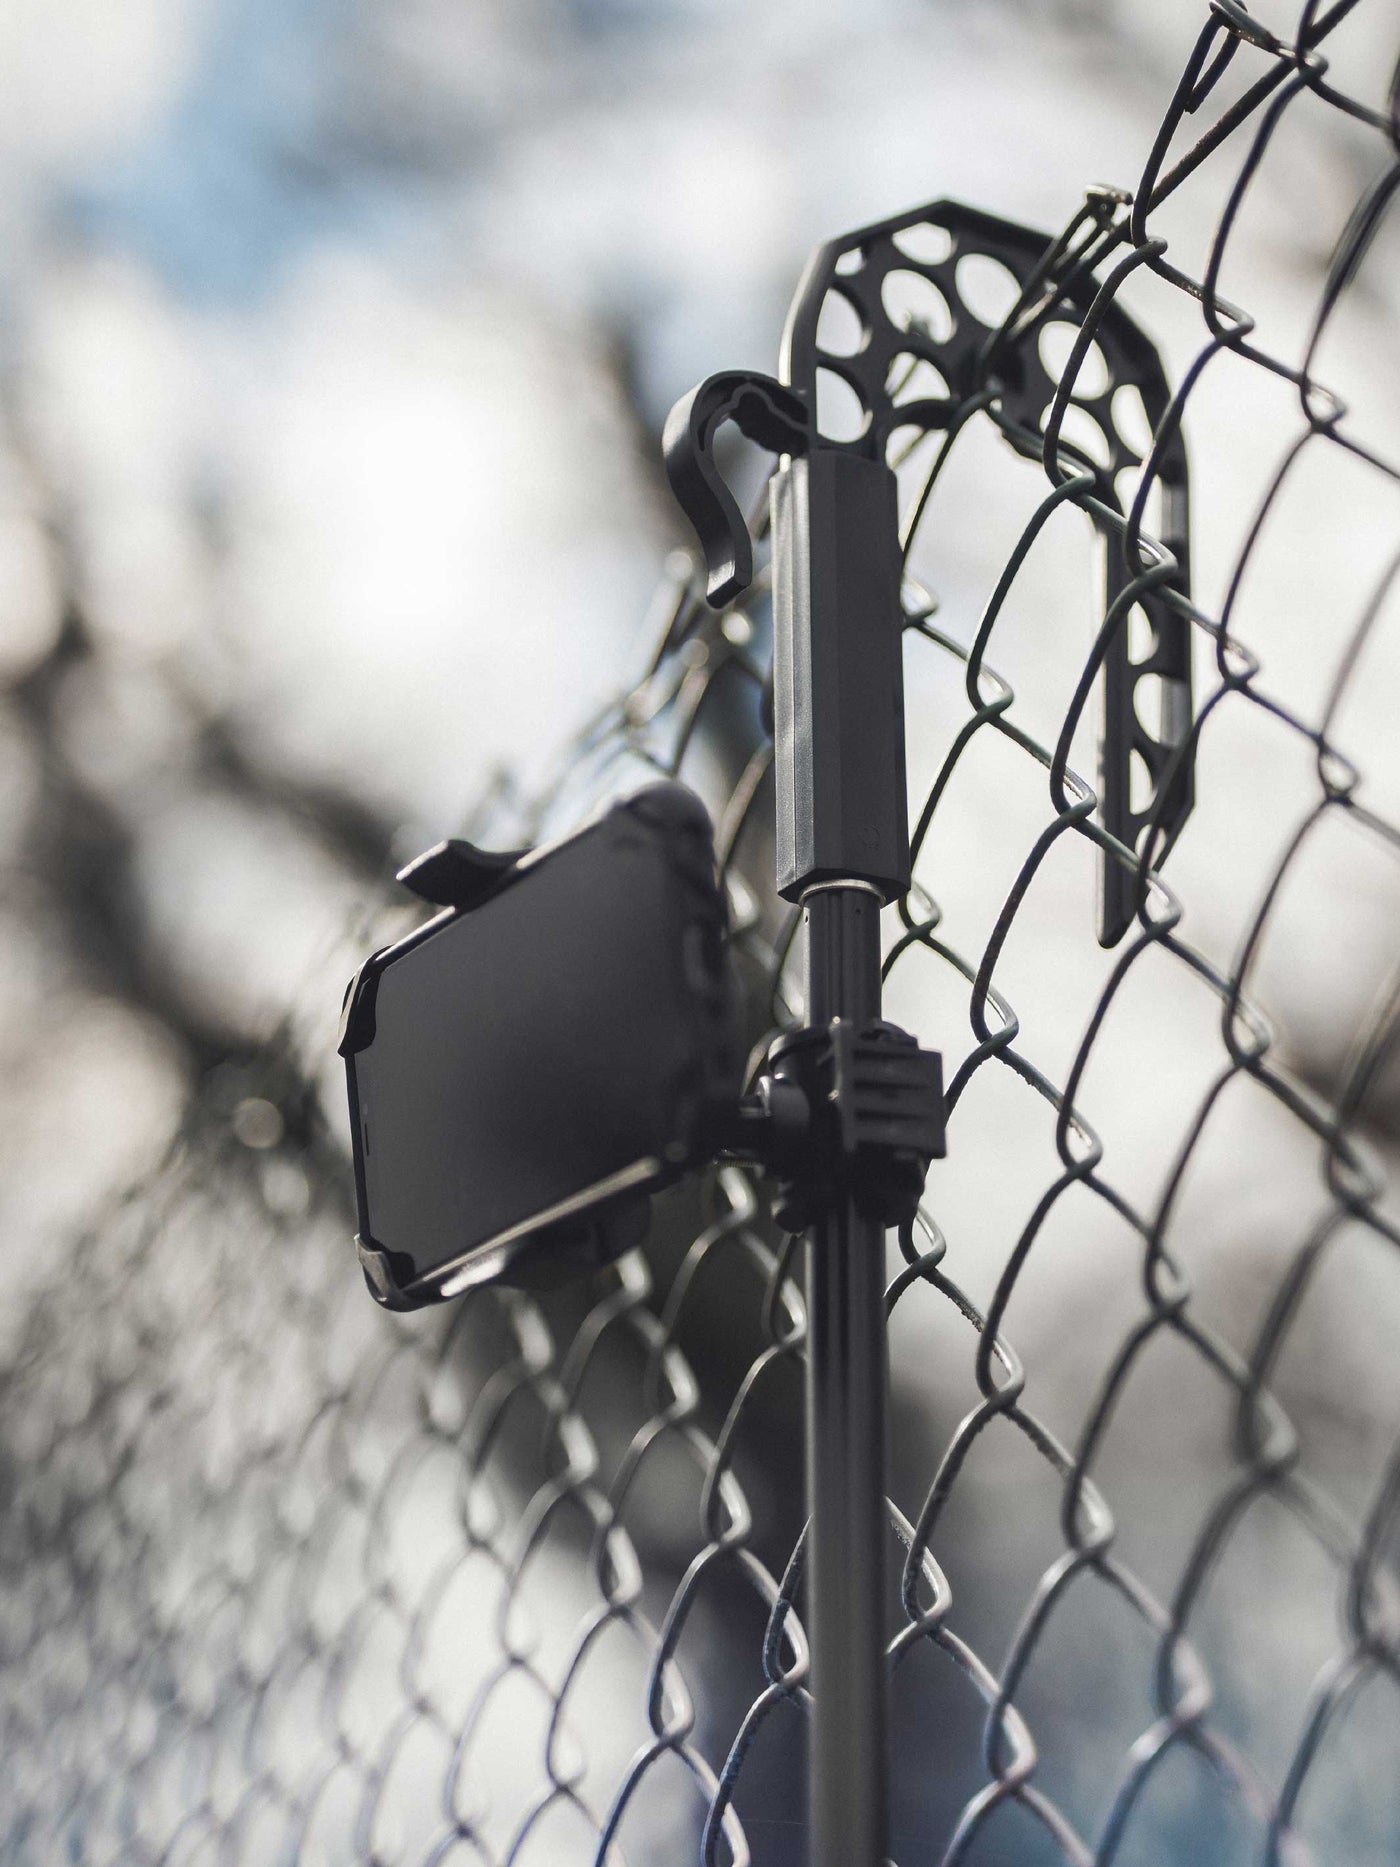 Functional Tennis Camera Mount on the fence